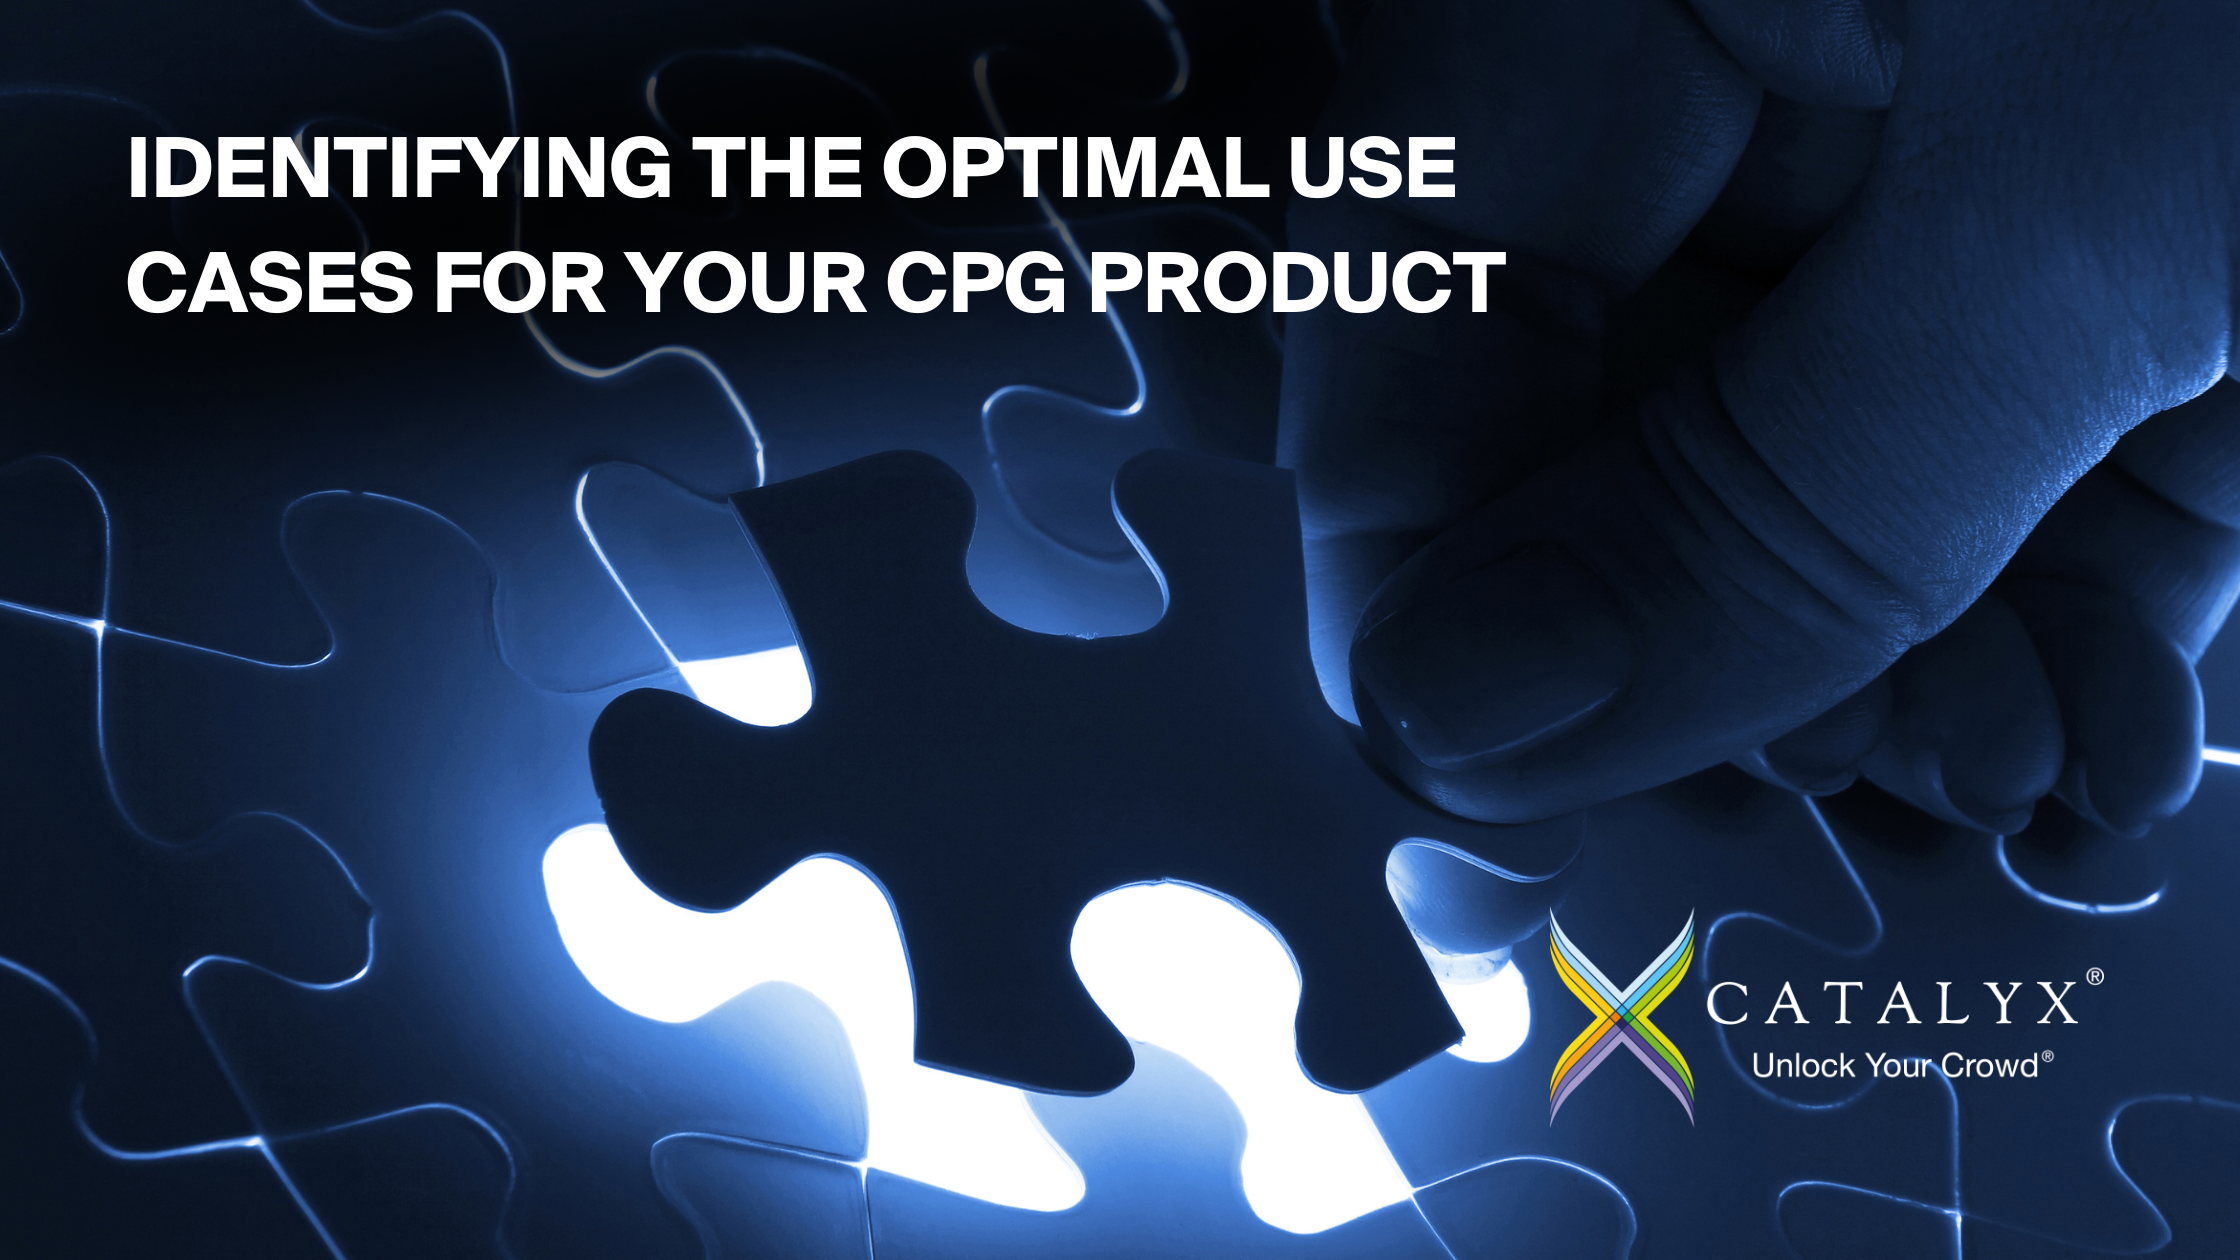 The optimal product use case puzzle piece